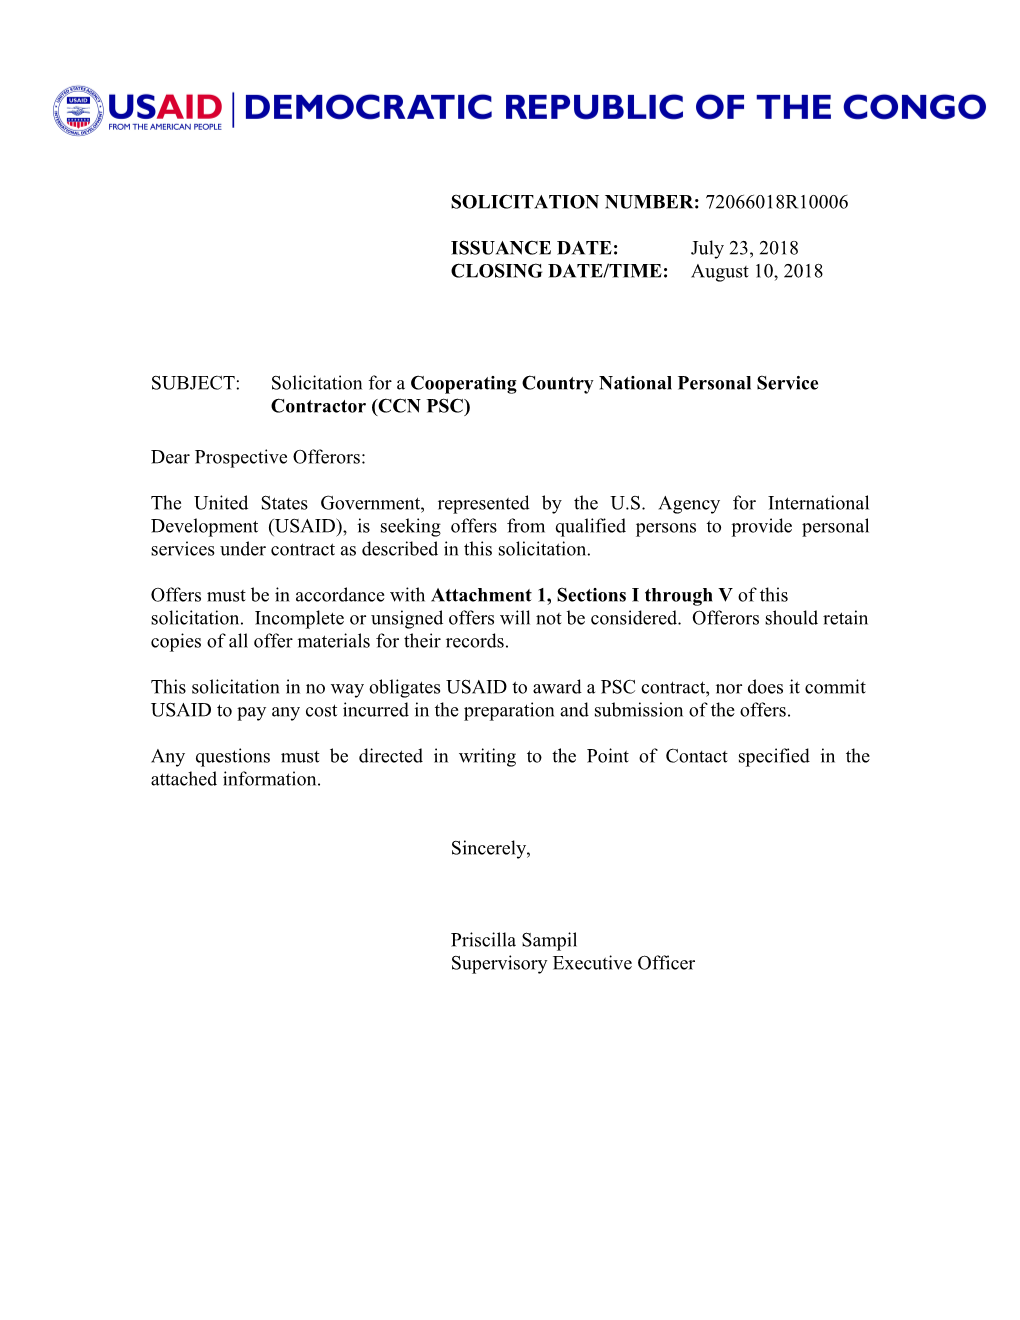 SUBJECT:Solicitation for a Cooperating Country National Personal Service Contractor (CCN PSC)